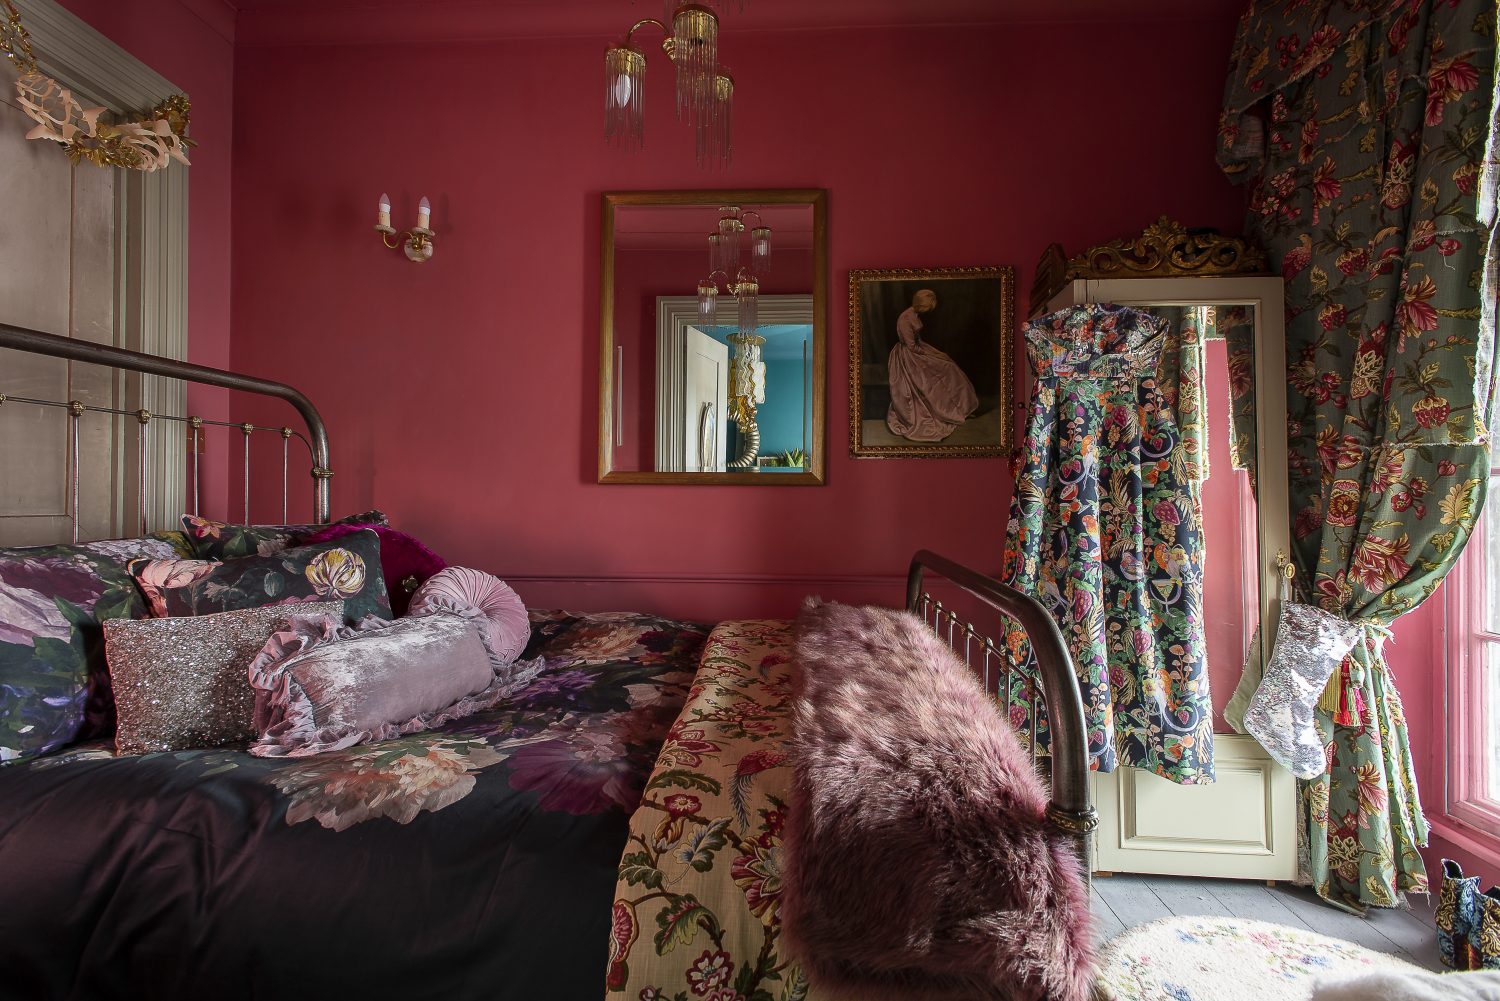 The wonderfully romantic bedroom is like a film set from the 1950s. The room is taken up almost entirely by a steel bed, made up with dramatic floral bed linen, from John Lewis, dressed with a floral counterpane and a purple fake fur throw